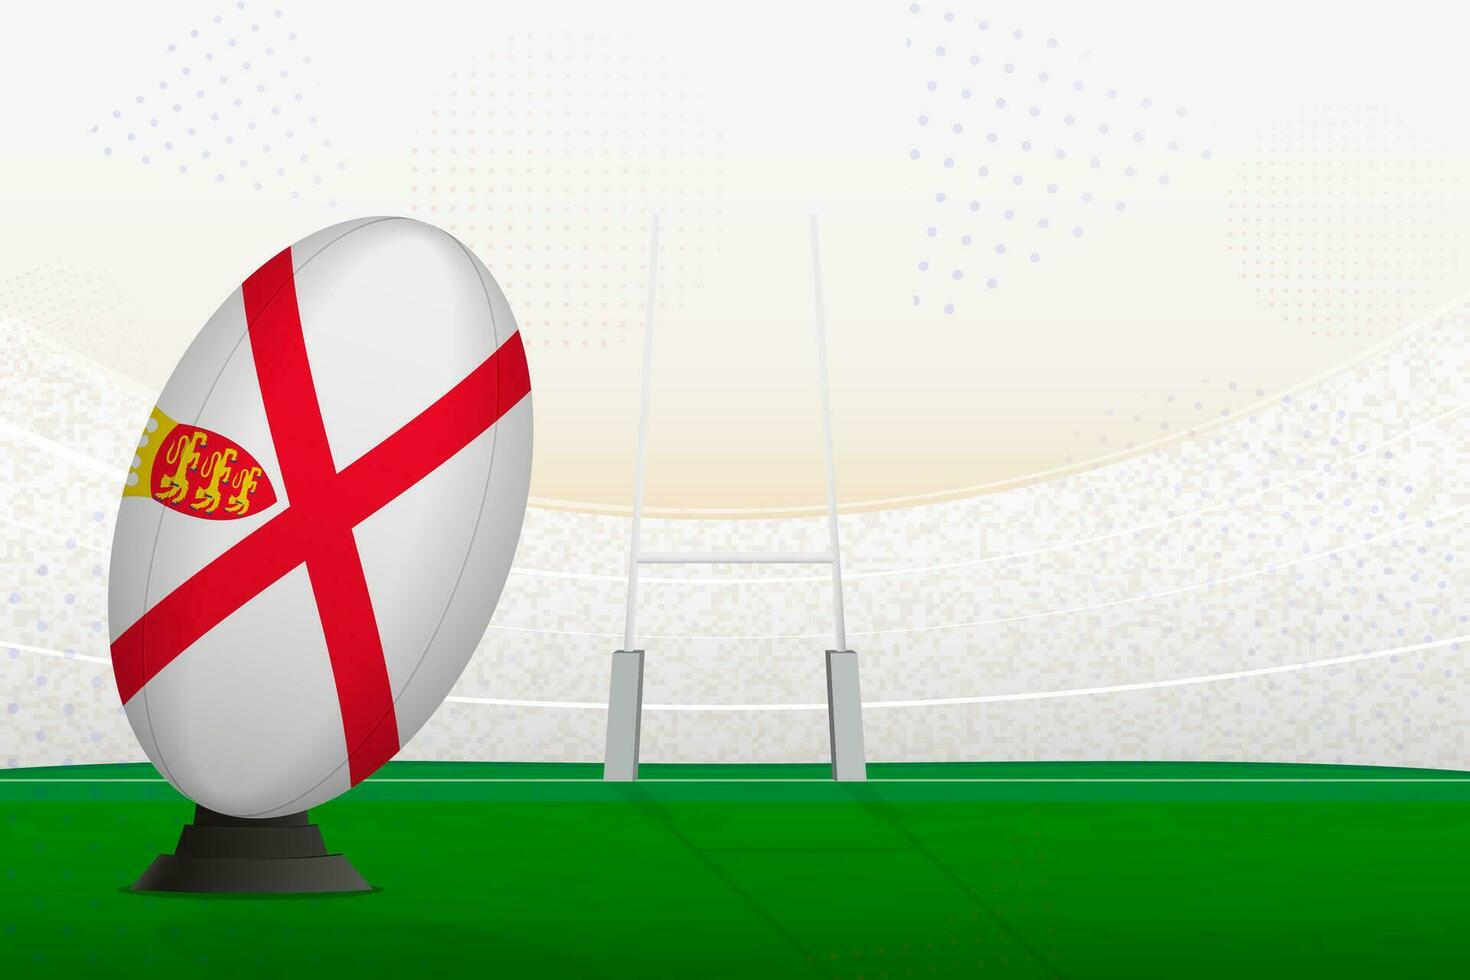 Jersey national team rugby ball on rugby stadium and goal posts, preparing for a penalty or free kick. vector